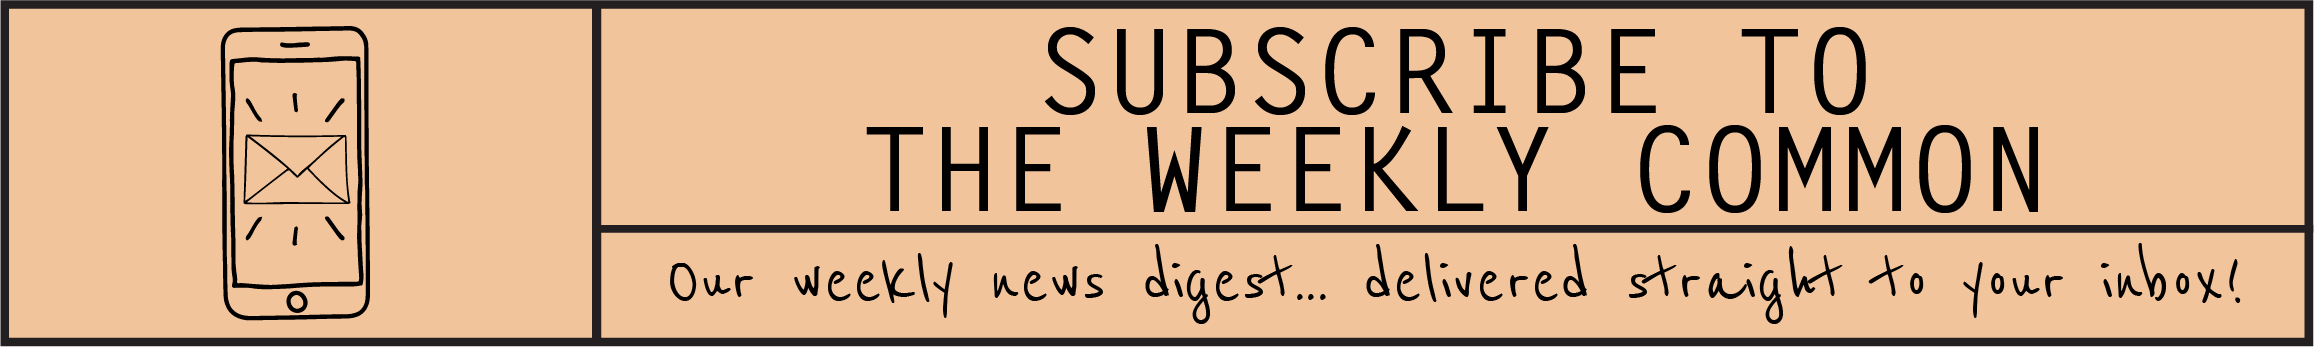 Subscribe To The Weekly Common - Header